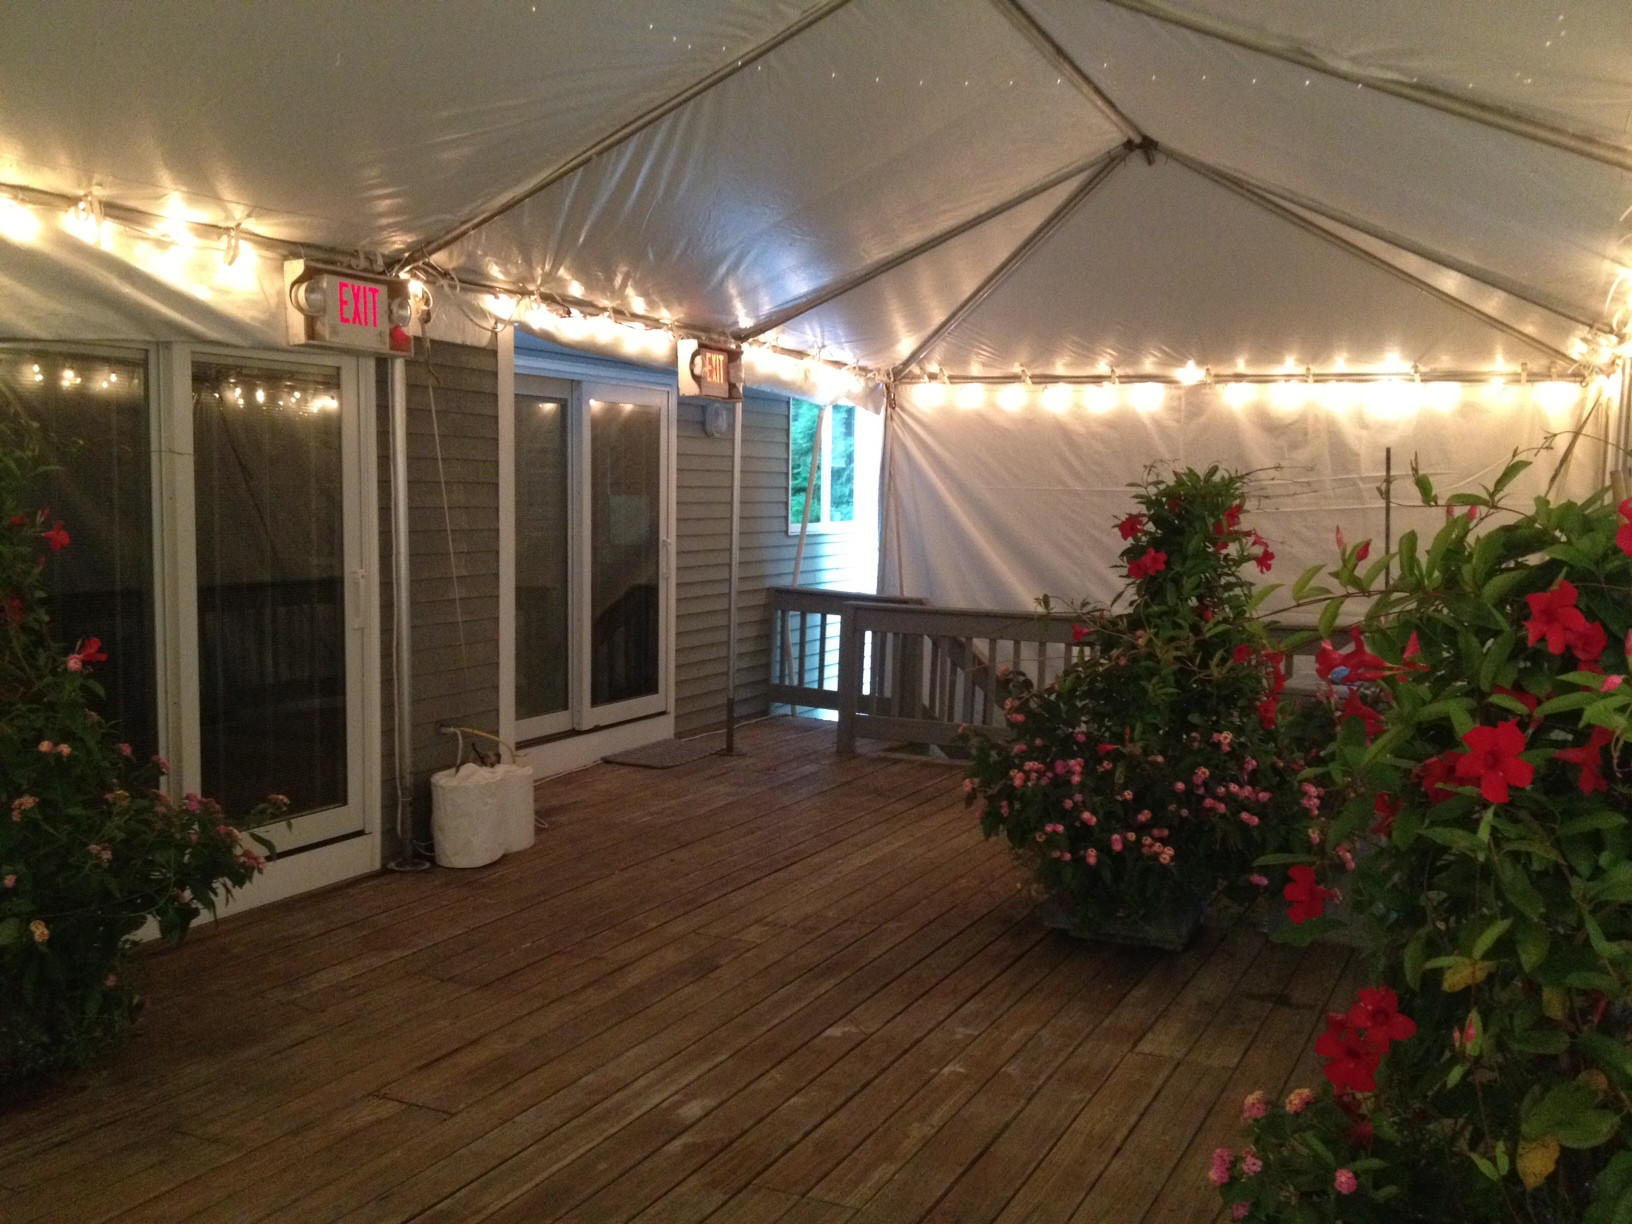 Backyard Party Tents
 Need More Space Hosting Impromptu Dinners & Events at